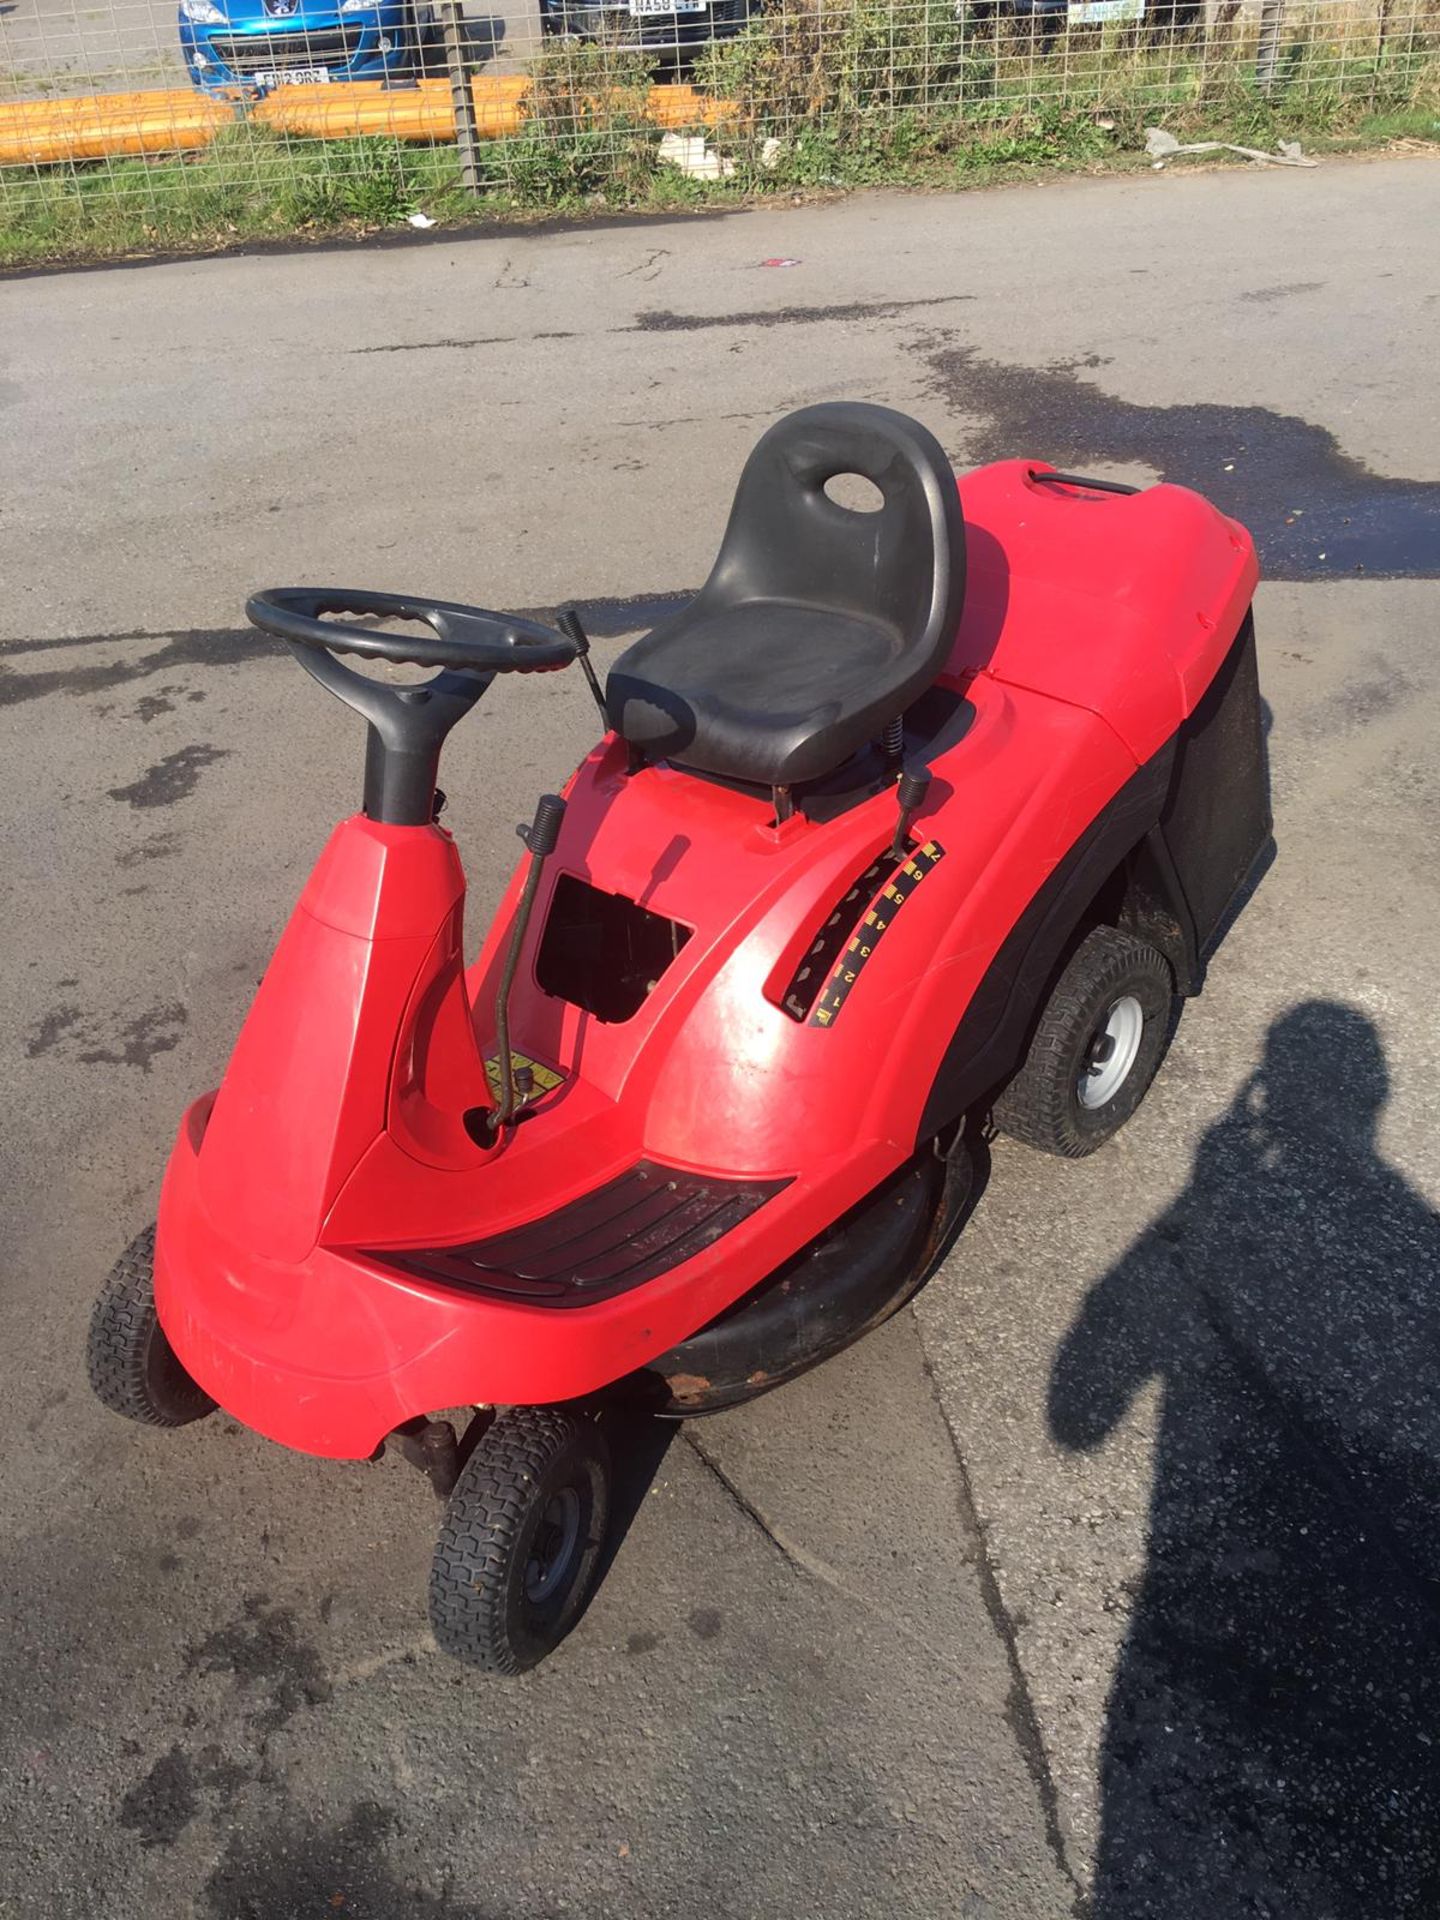 CASTLEGARDEN F72 RIDE ON LAWN MOWER WITH REAR COLLECTOR, YEAR 1998, 5.2KW, 163 KG *NO VAT*